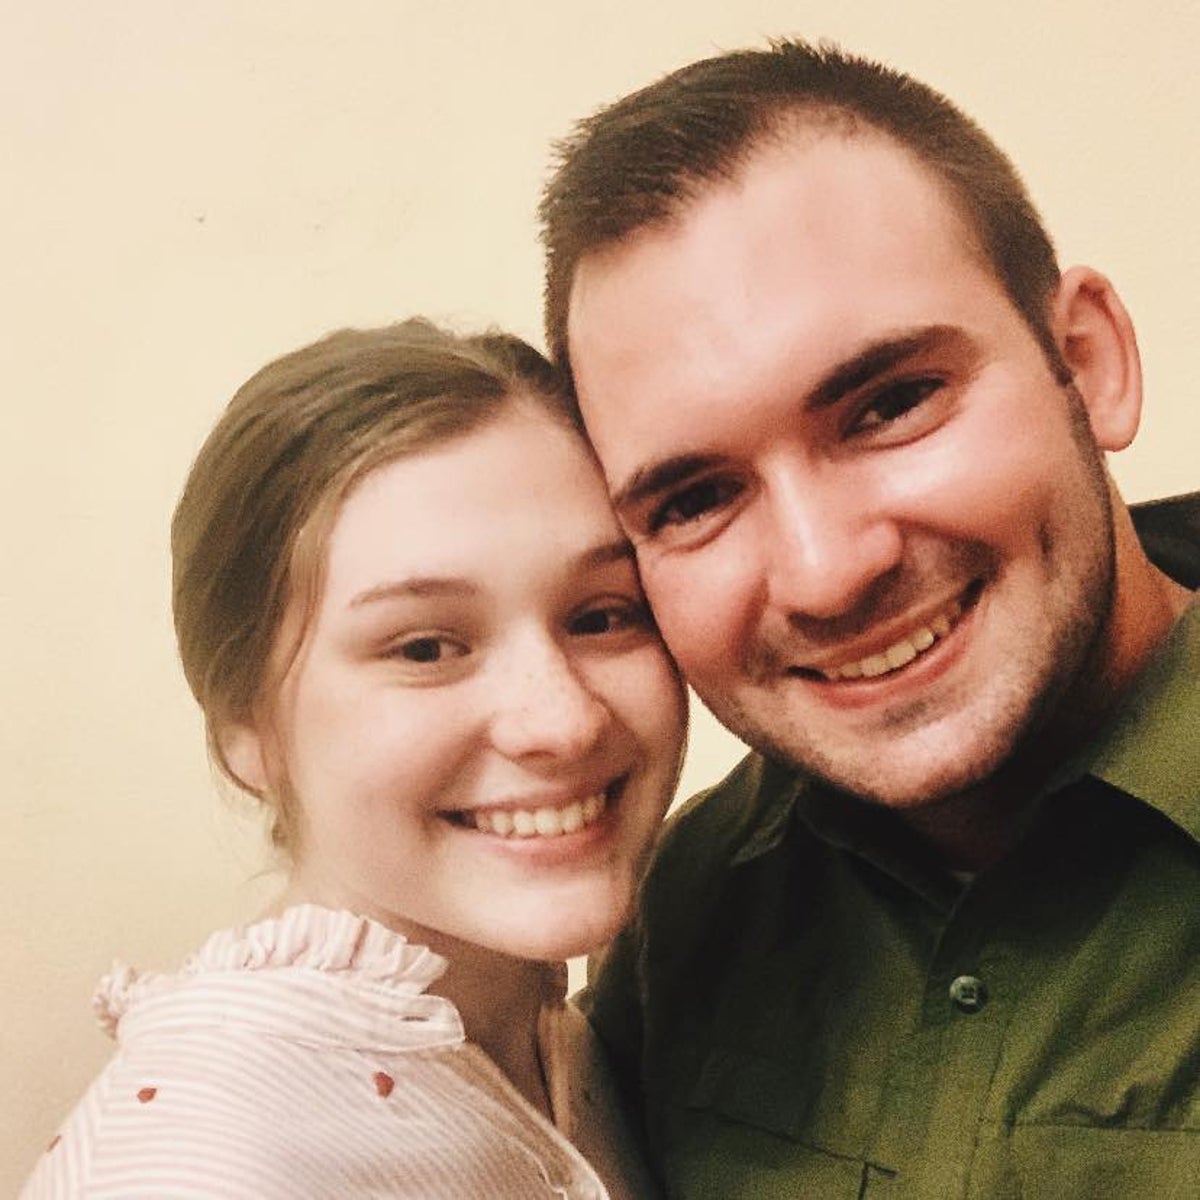 Young missionary couple from Oklahoma killed in brutal gang attack in Haiti